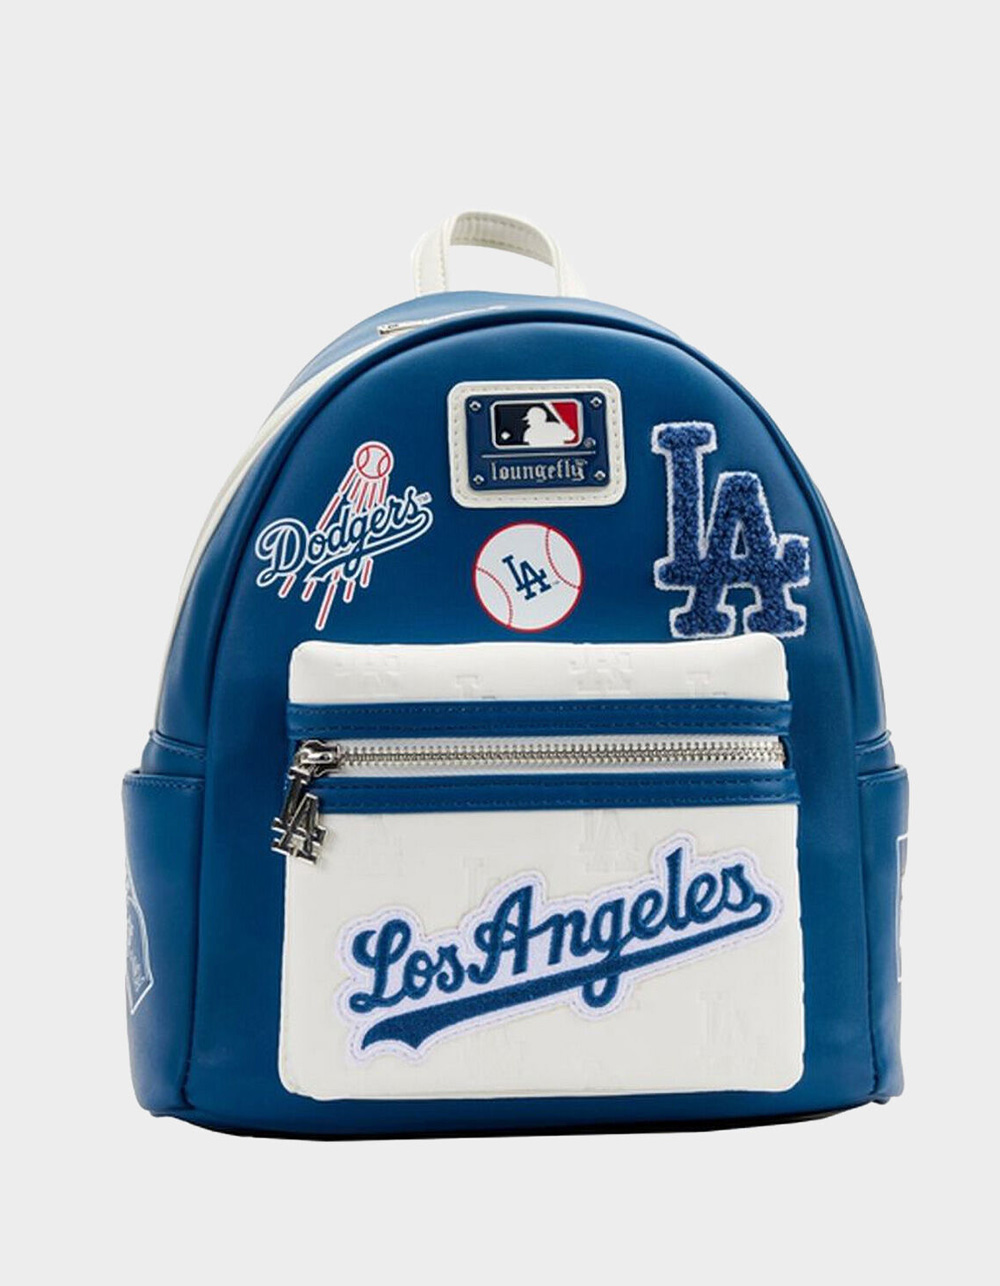 Sports Pop Culture Merch: Loungefly x MLB Collection